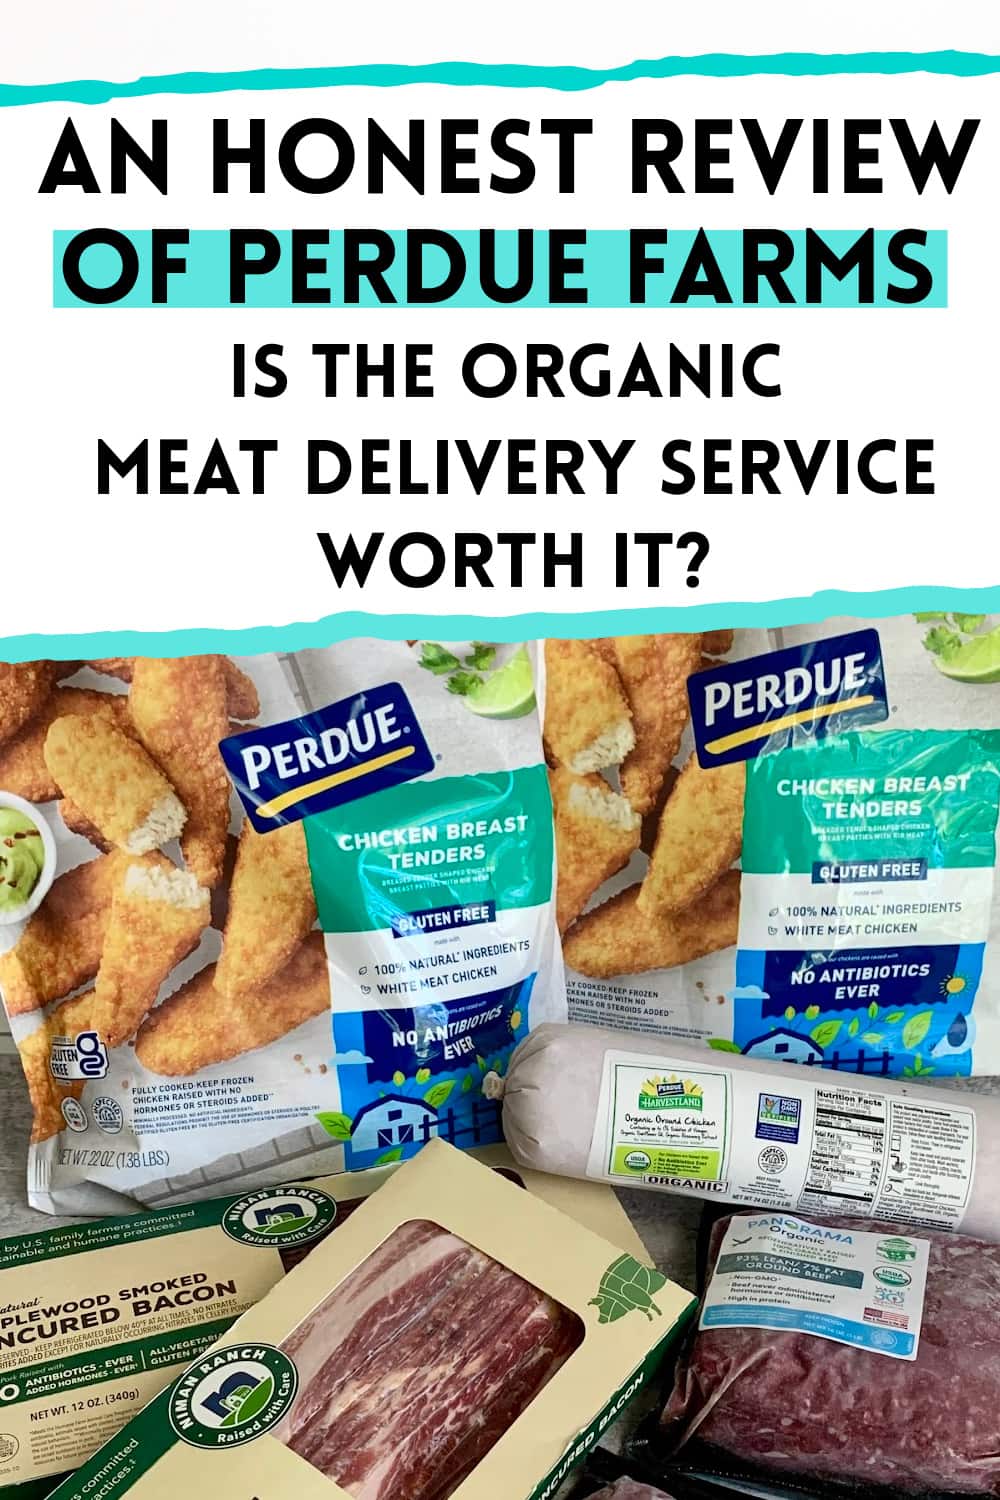 An honest review of perdue farms is the organic meat delivery service worth it? text on an image of a bundle of meat from perdue farms